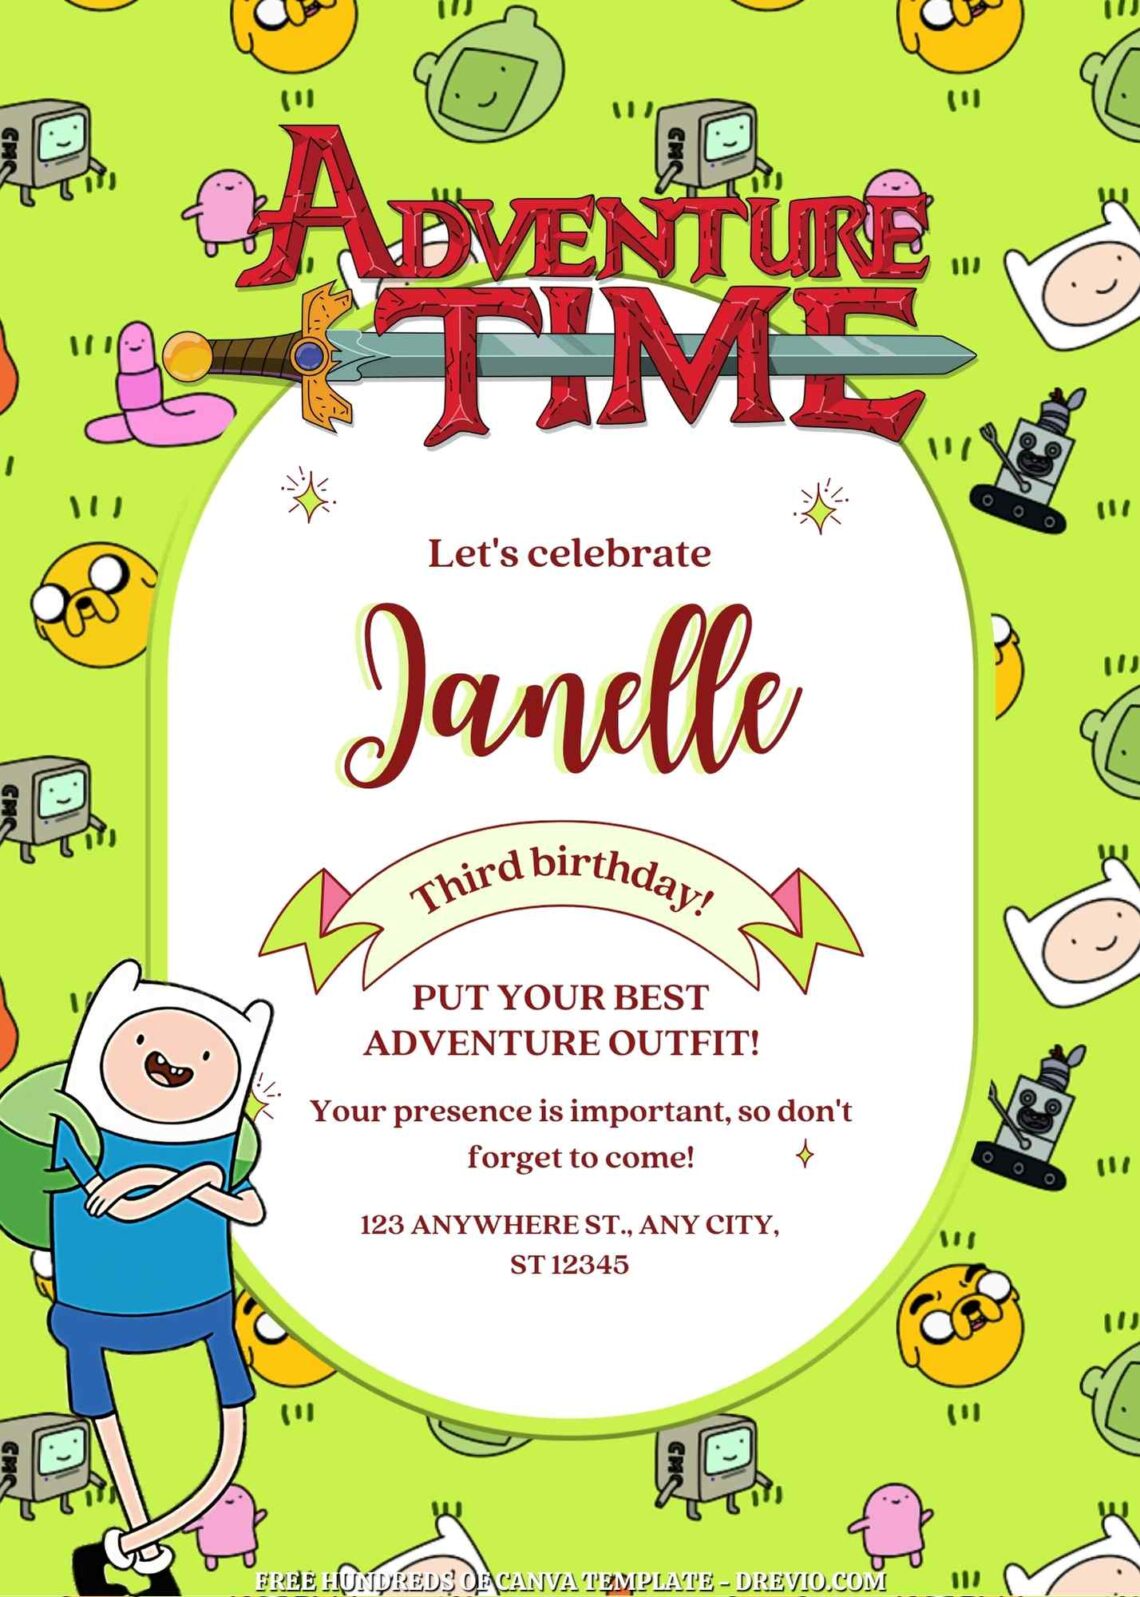 Free Adventure Time Birthday Invitations with Group in the Green Background